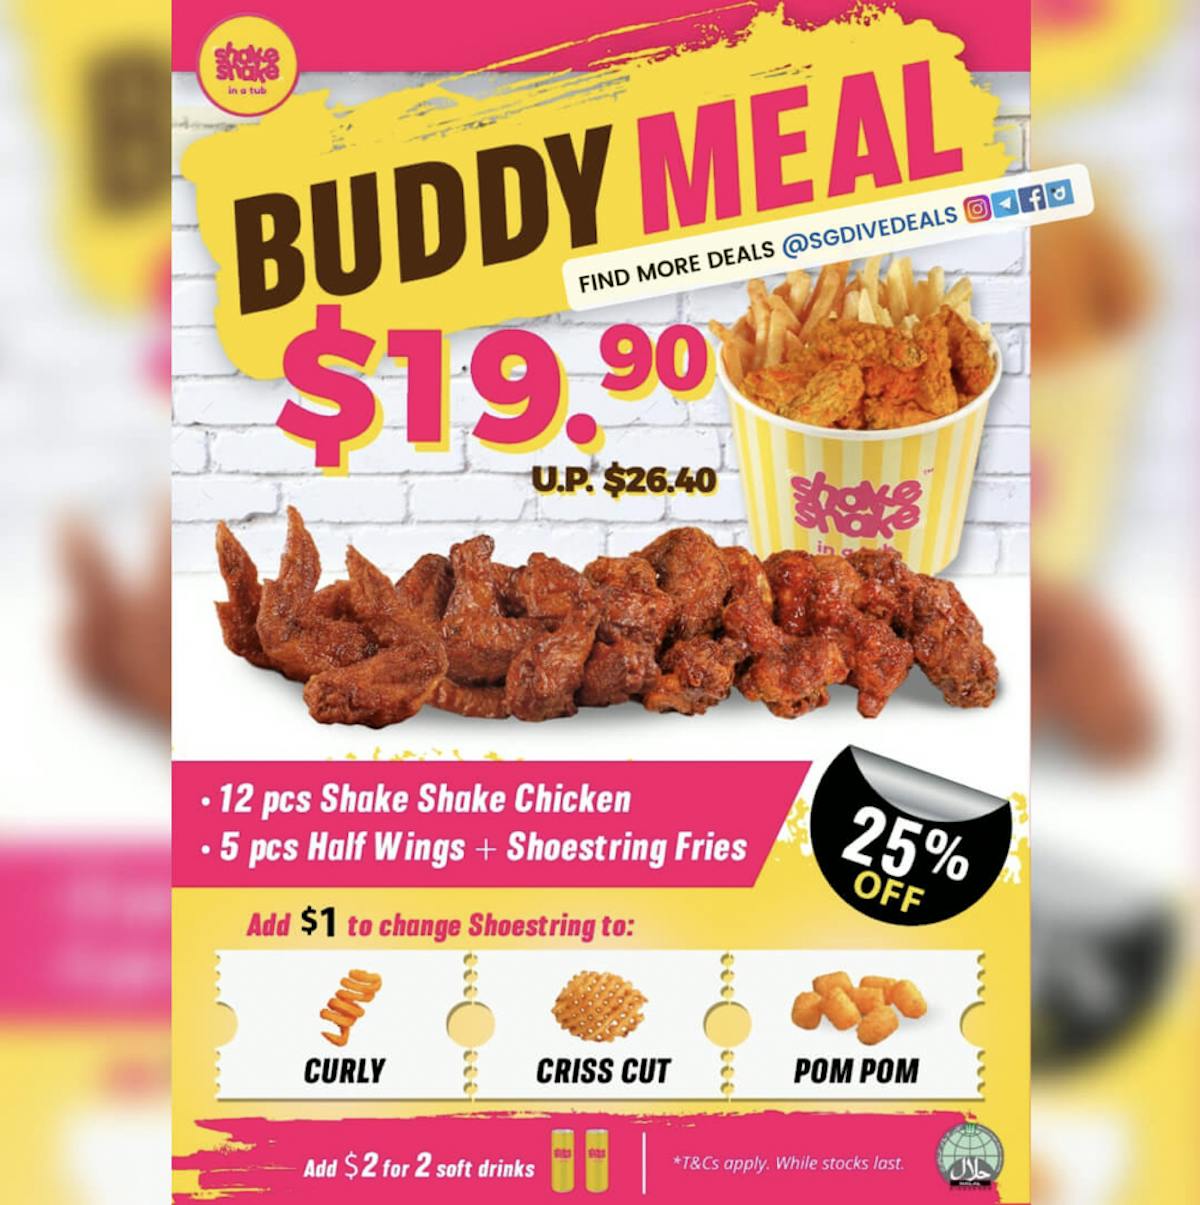 Buddy Meal for 2 pax